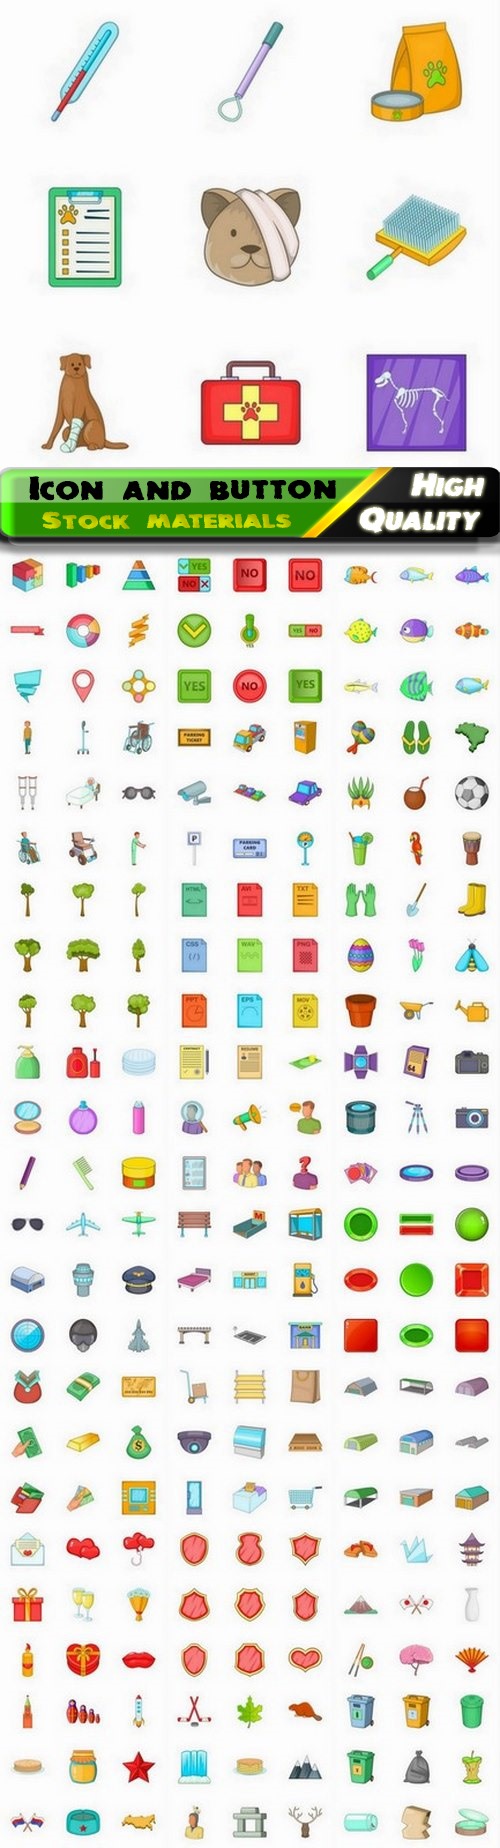 Set of cute icon and button and different objects 25 Eps